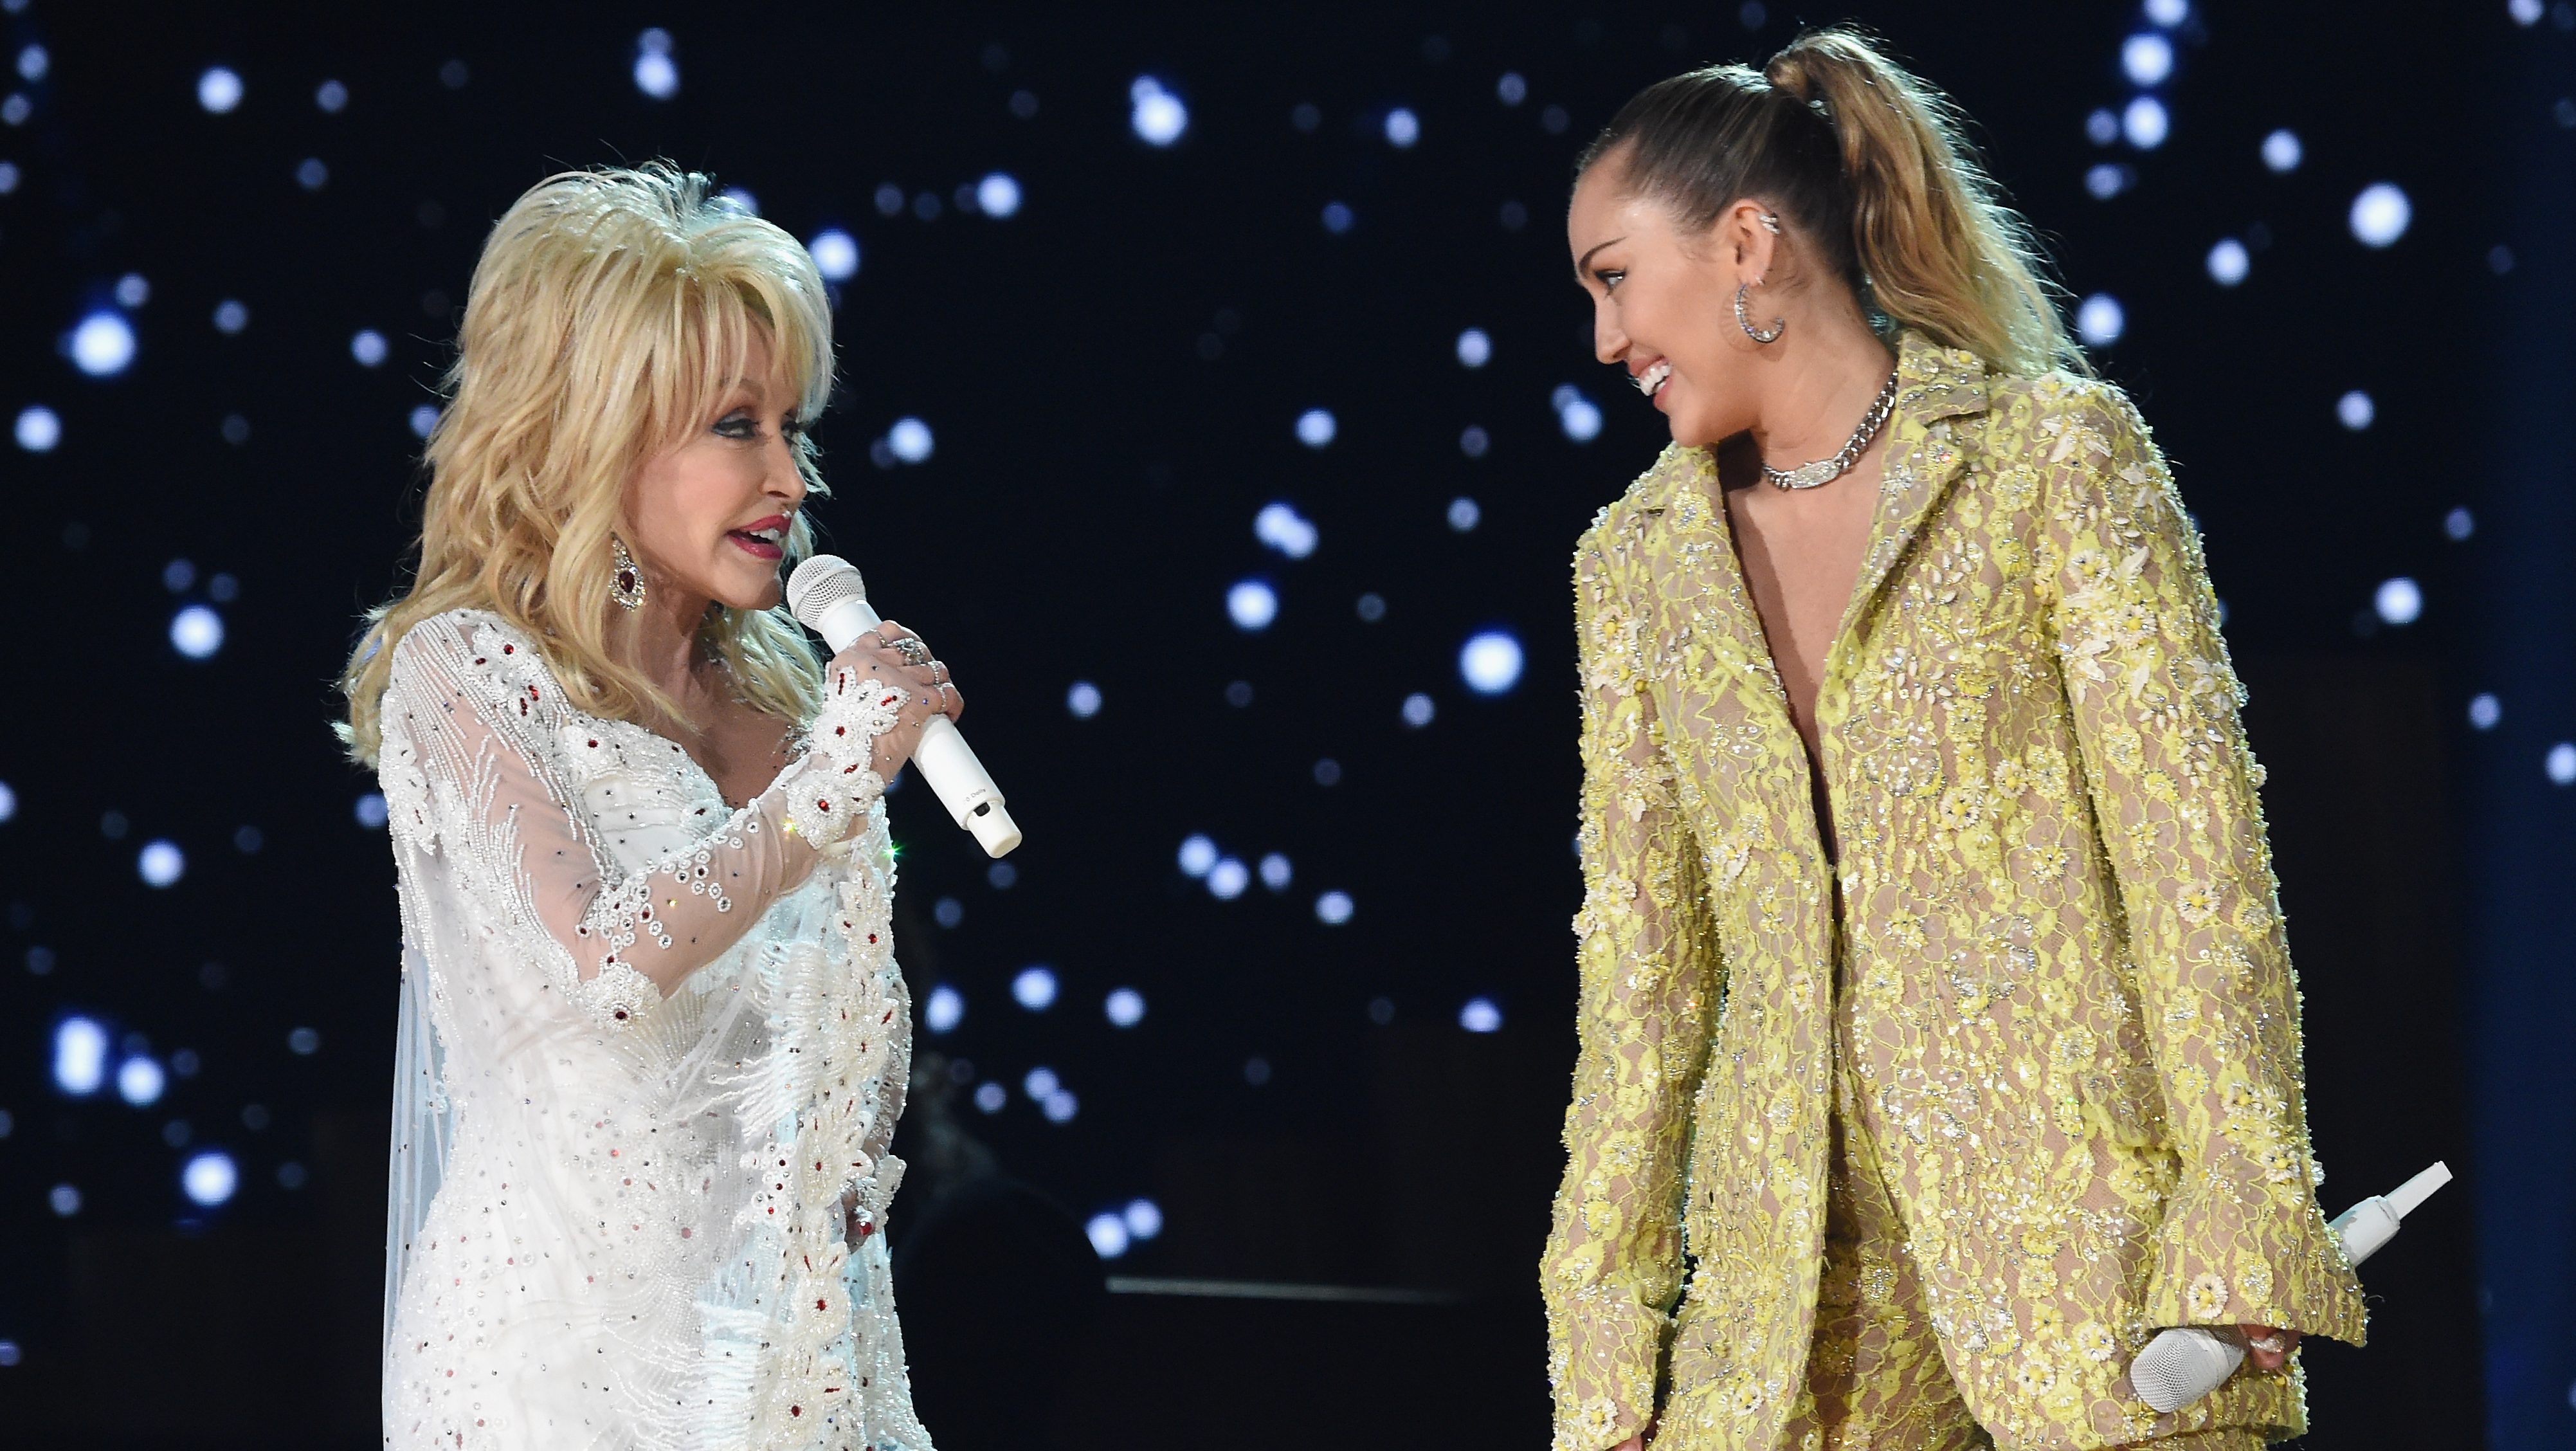 Dolly Parton and Miley Cyrus perform onstage during the 61st Annual GRAMMY Awards in 2019